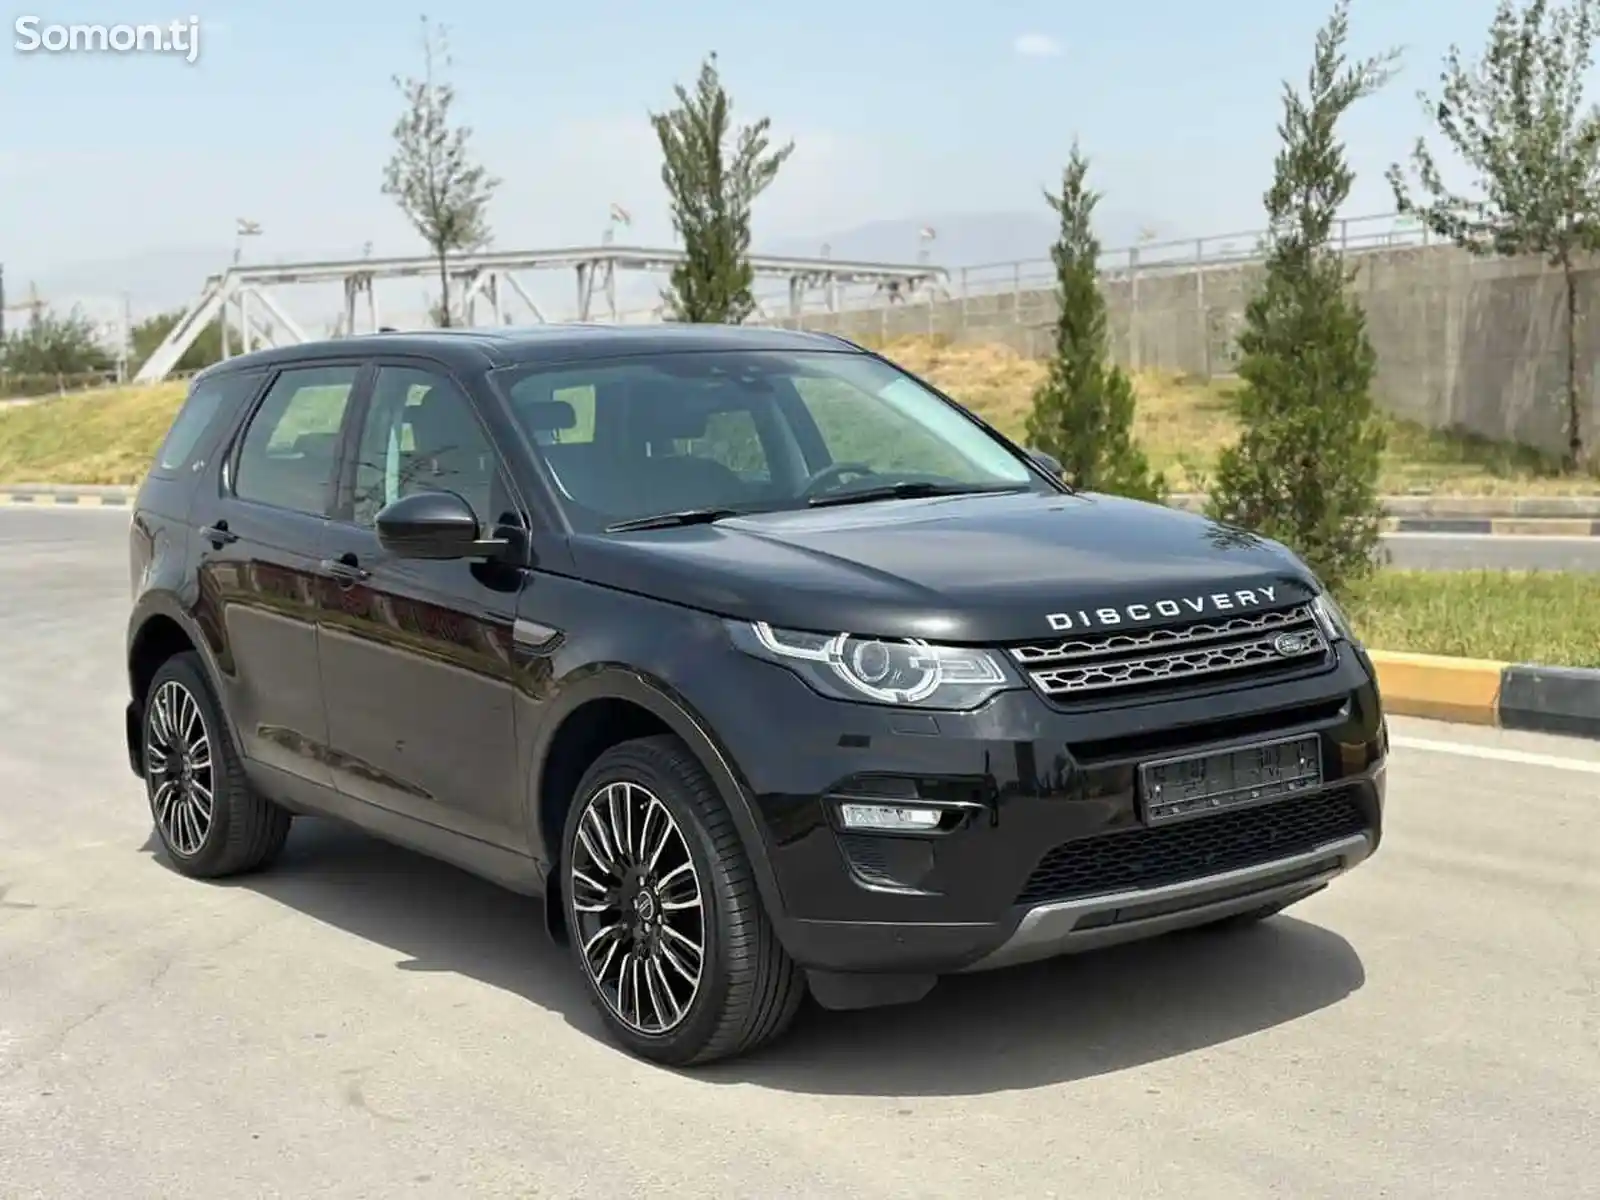 Land Rover Discovery, 2018-1